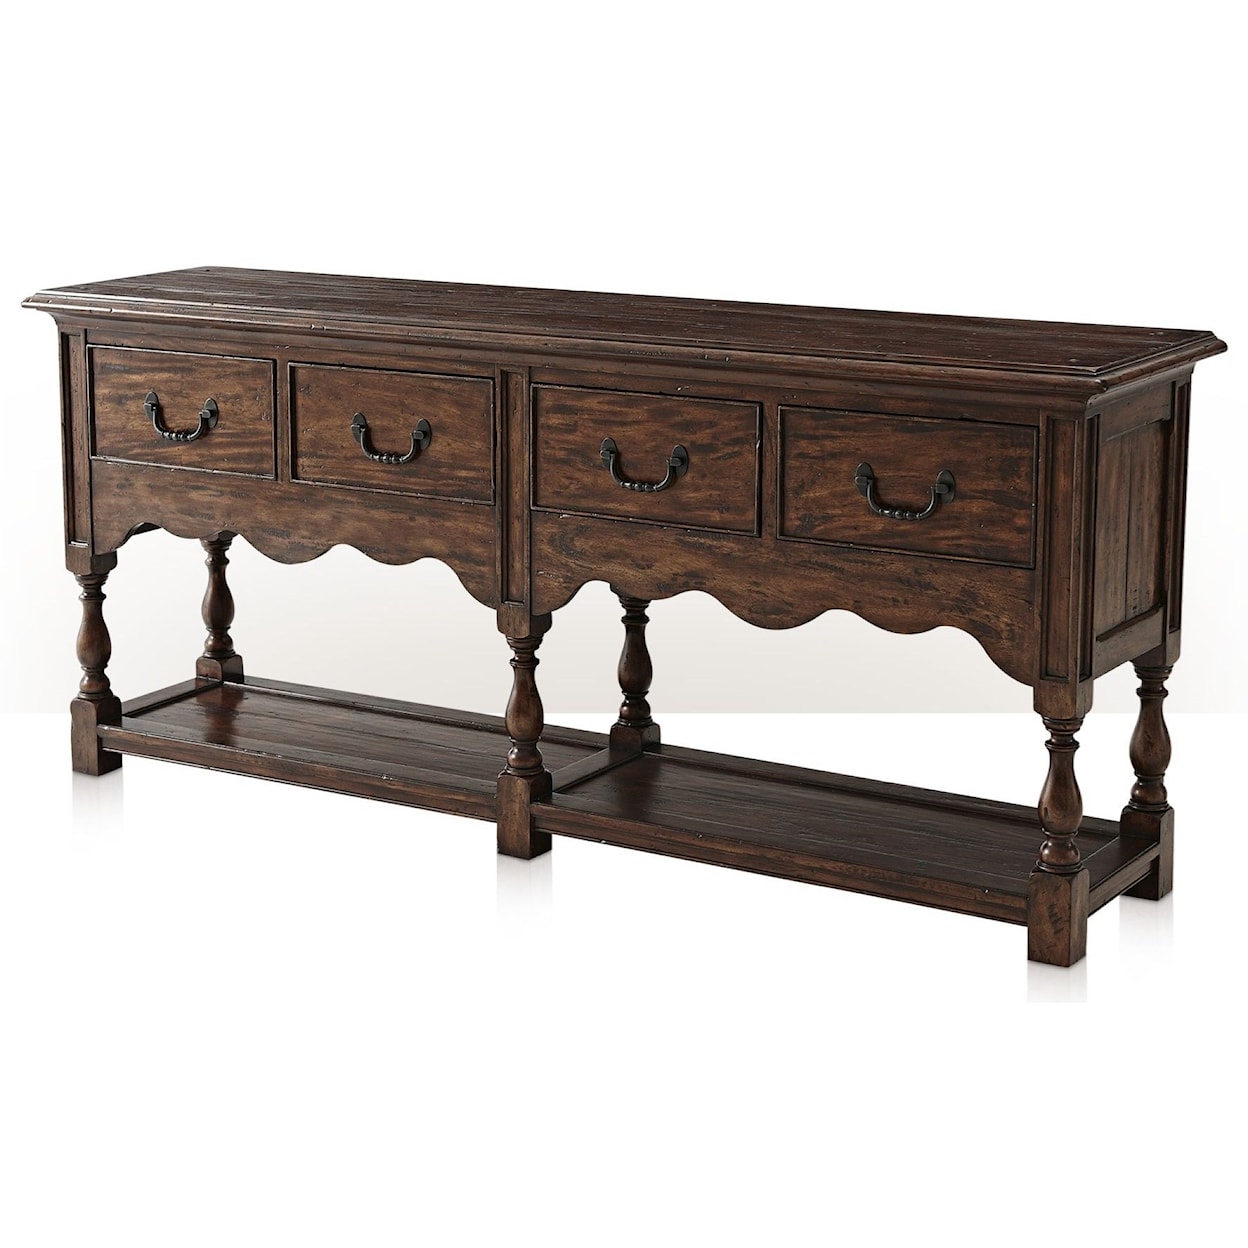 Theodore Alexander Cabinets and Sideboards 4 Drawer Sideboard